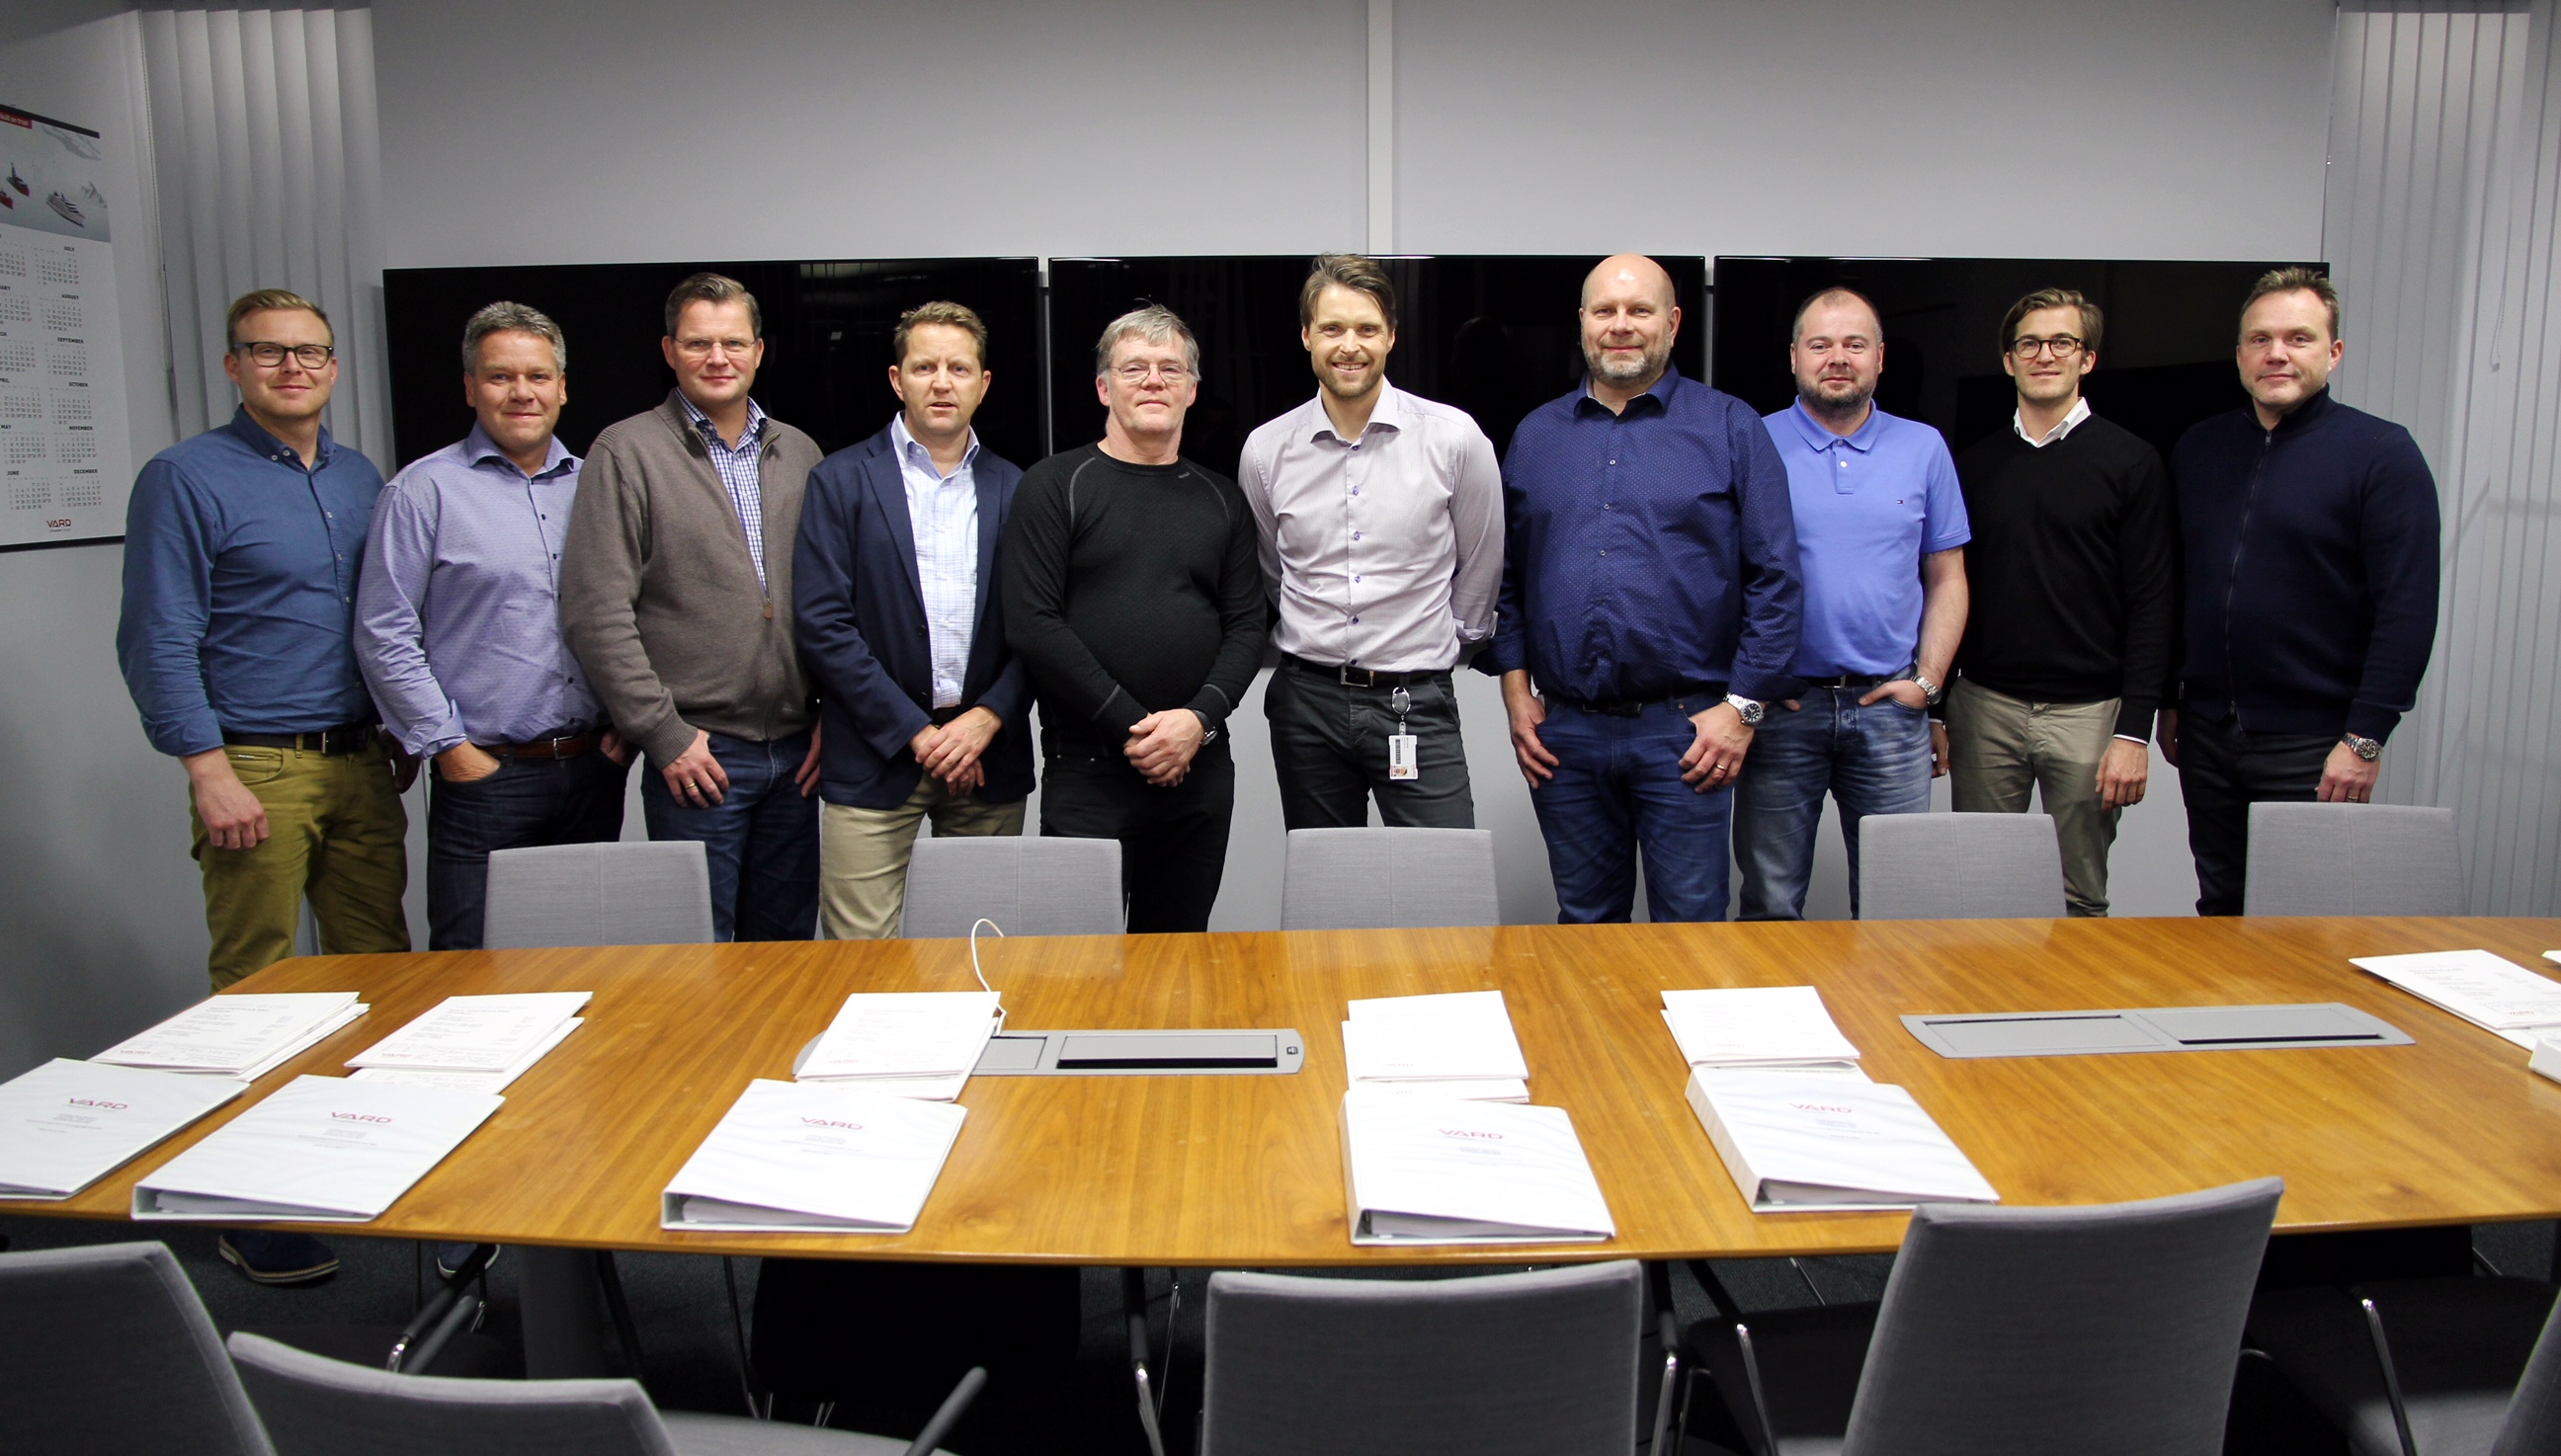 Representatives of VARD and the Icelandic shipowners